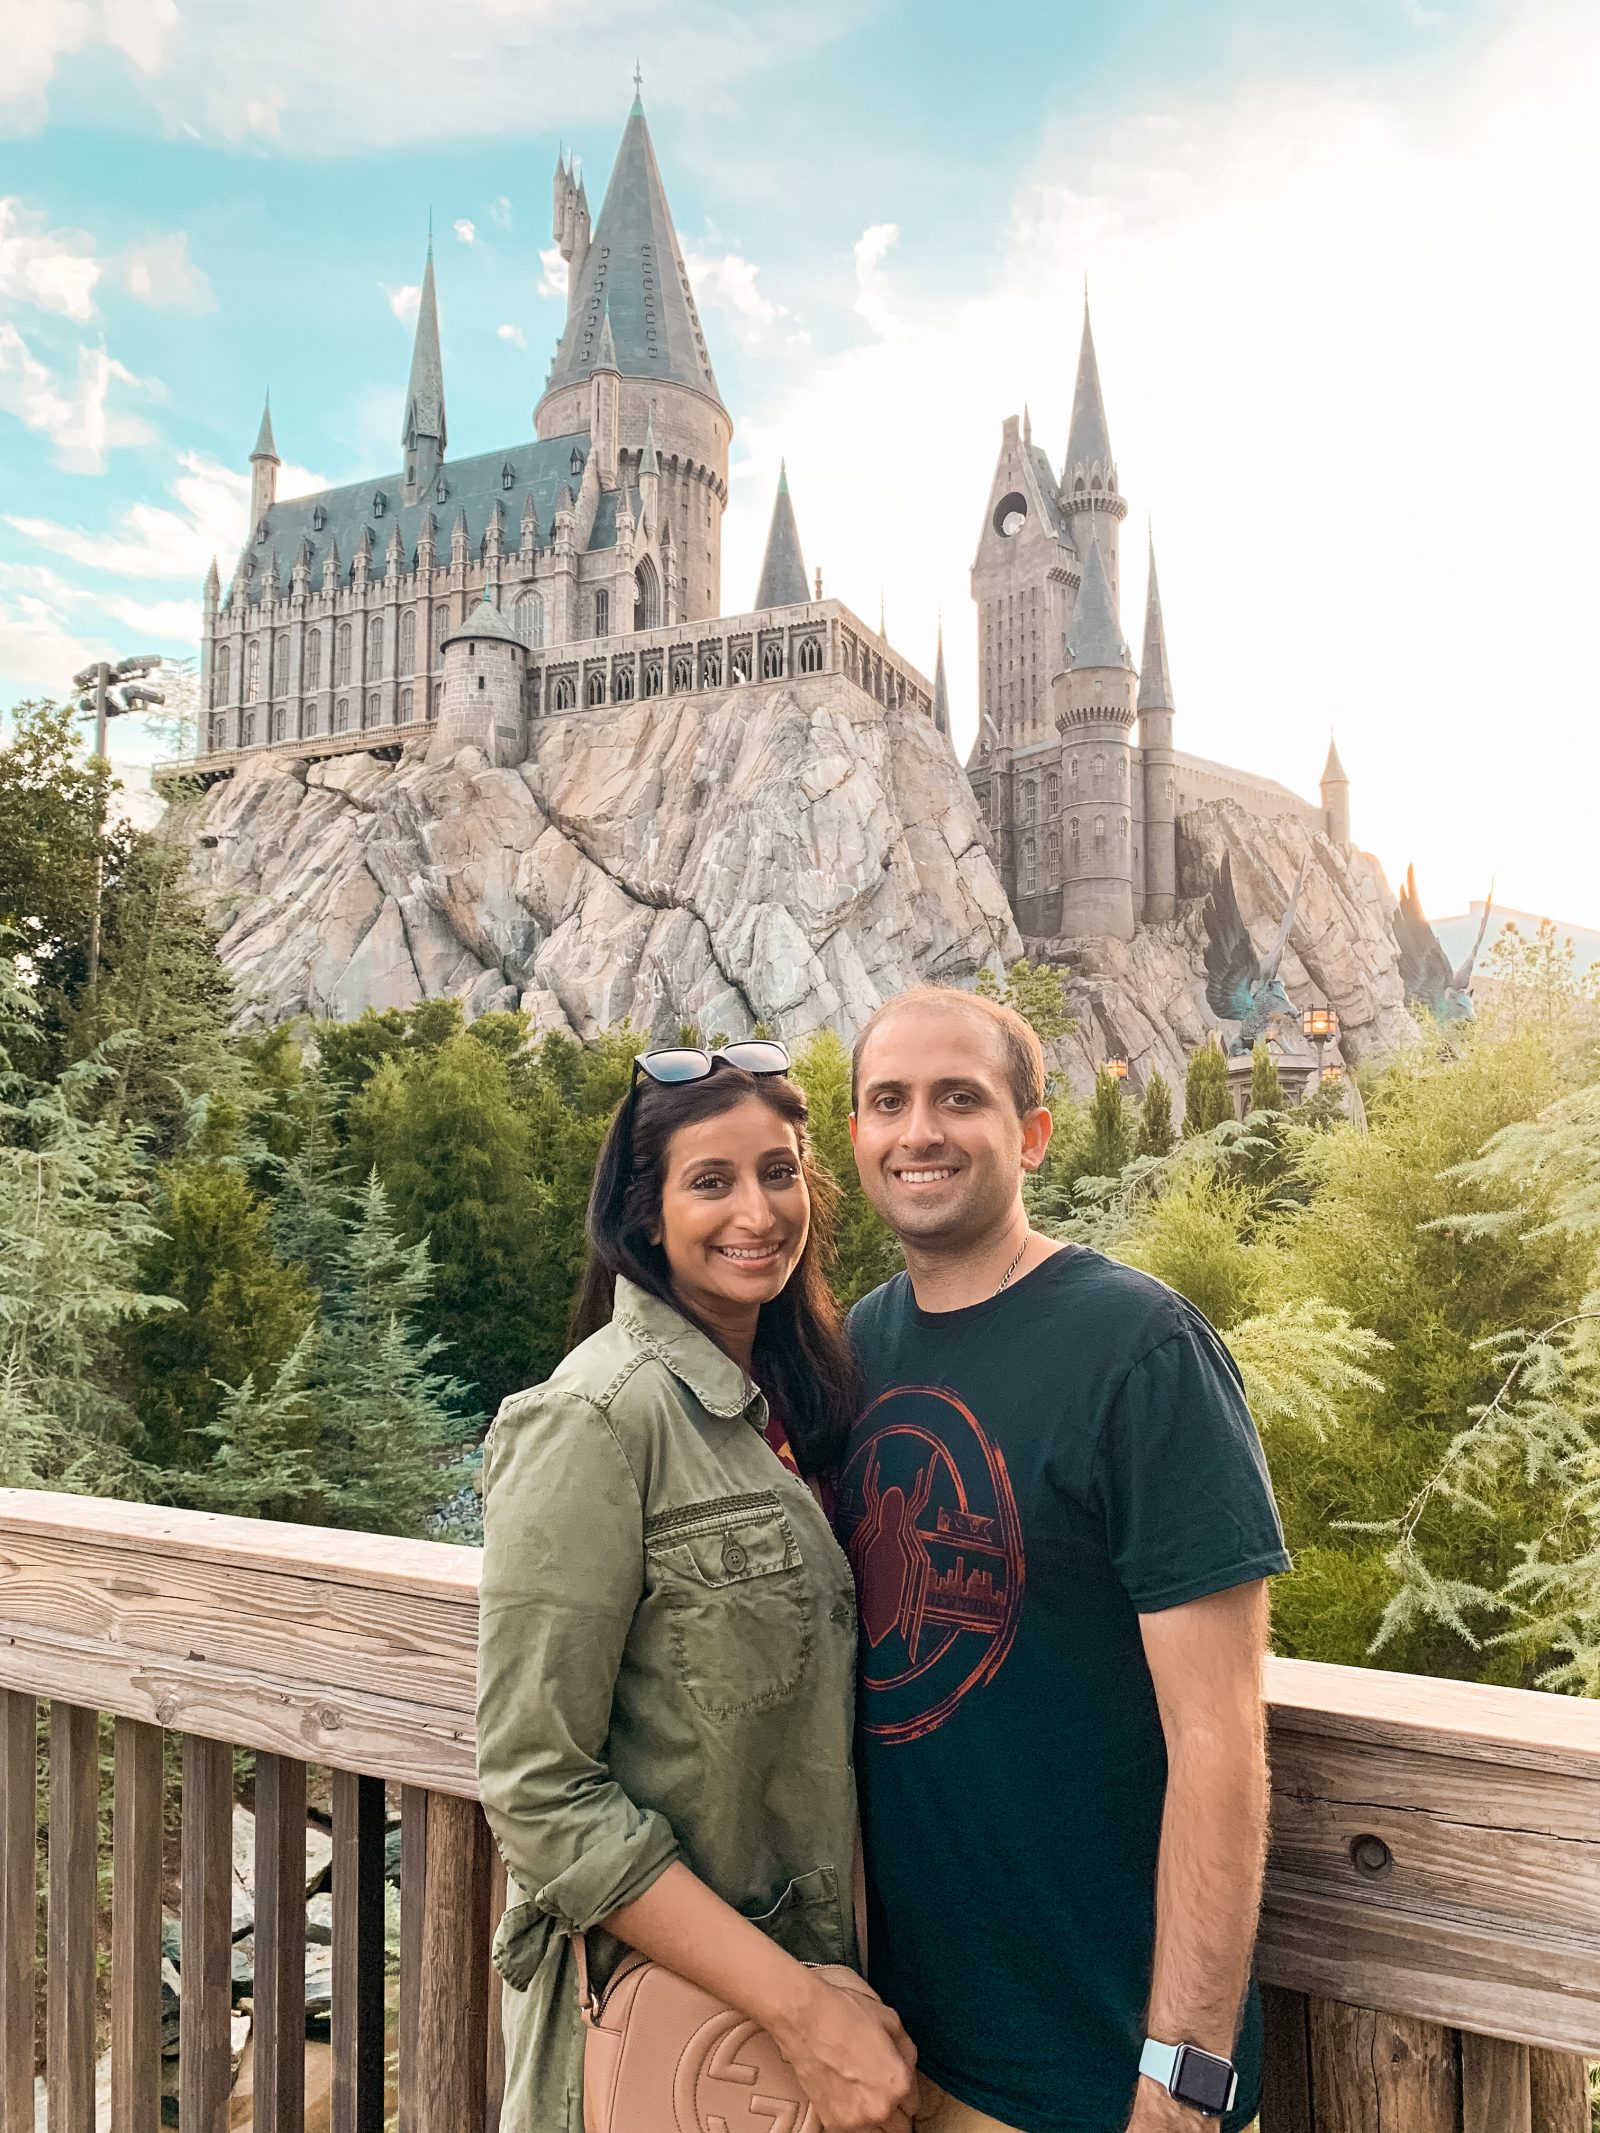 a picture of hubby and me outside Hogwarts at Wizarding World of Harry Potter